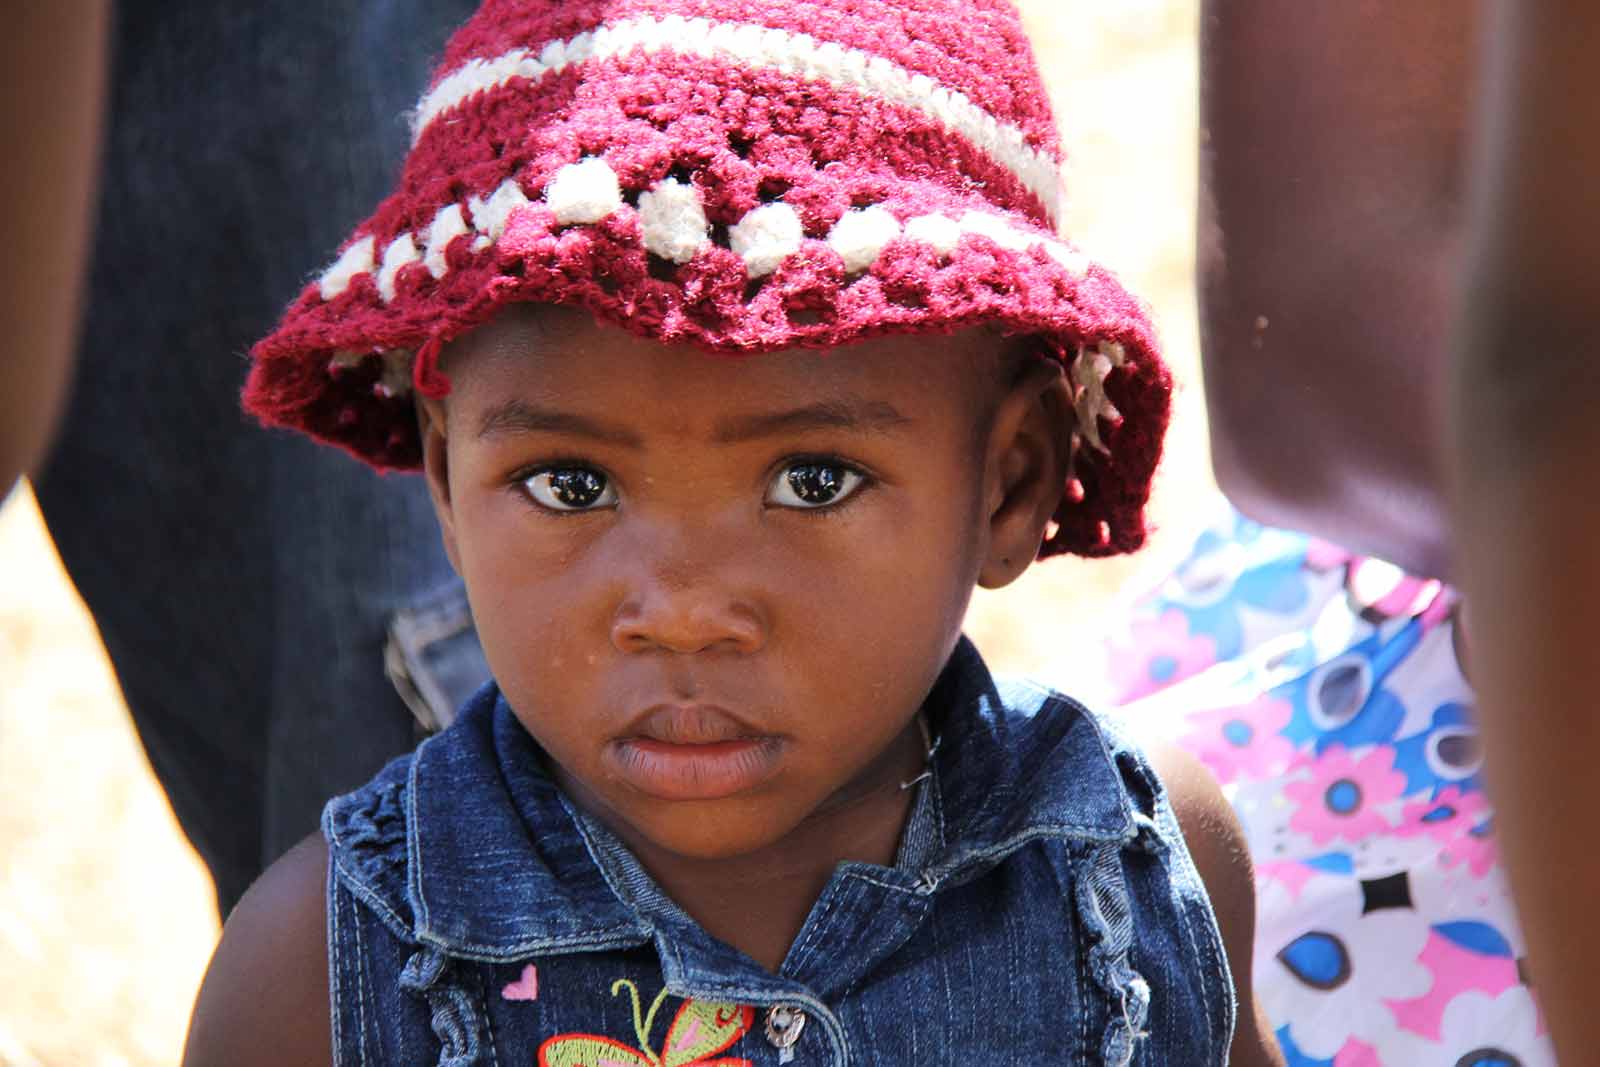 Haiti Health Initiative Photography (Pictures of Locals #7) - April Stout